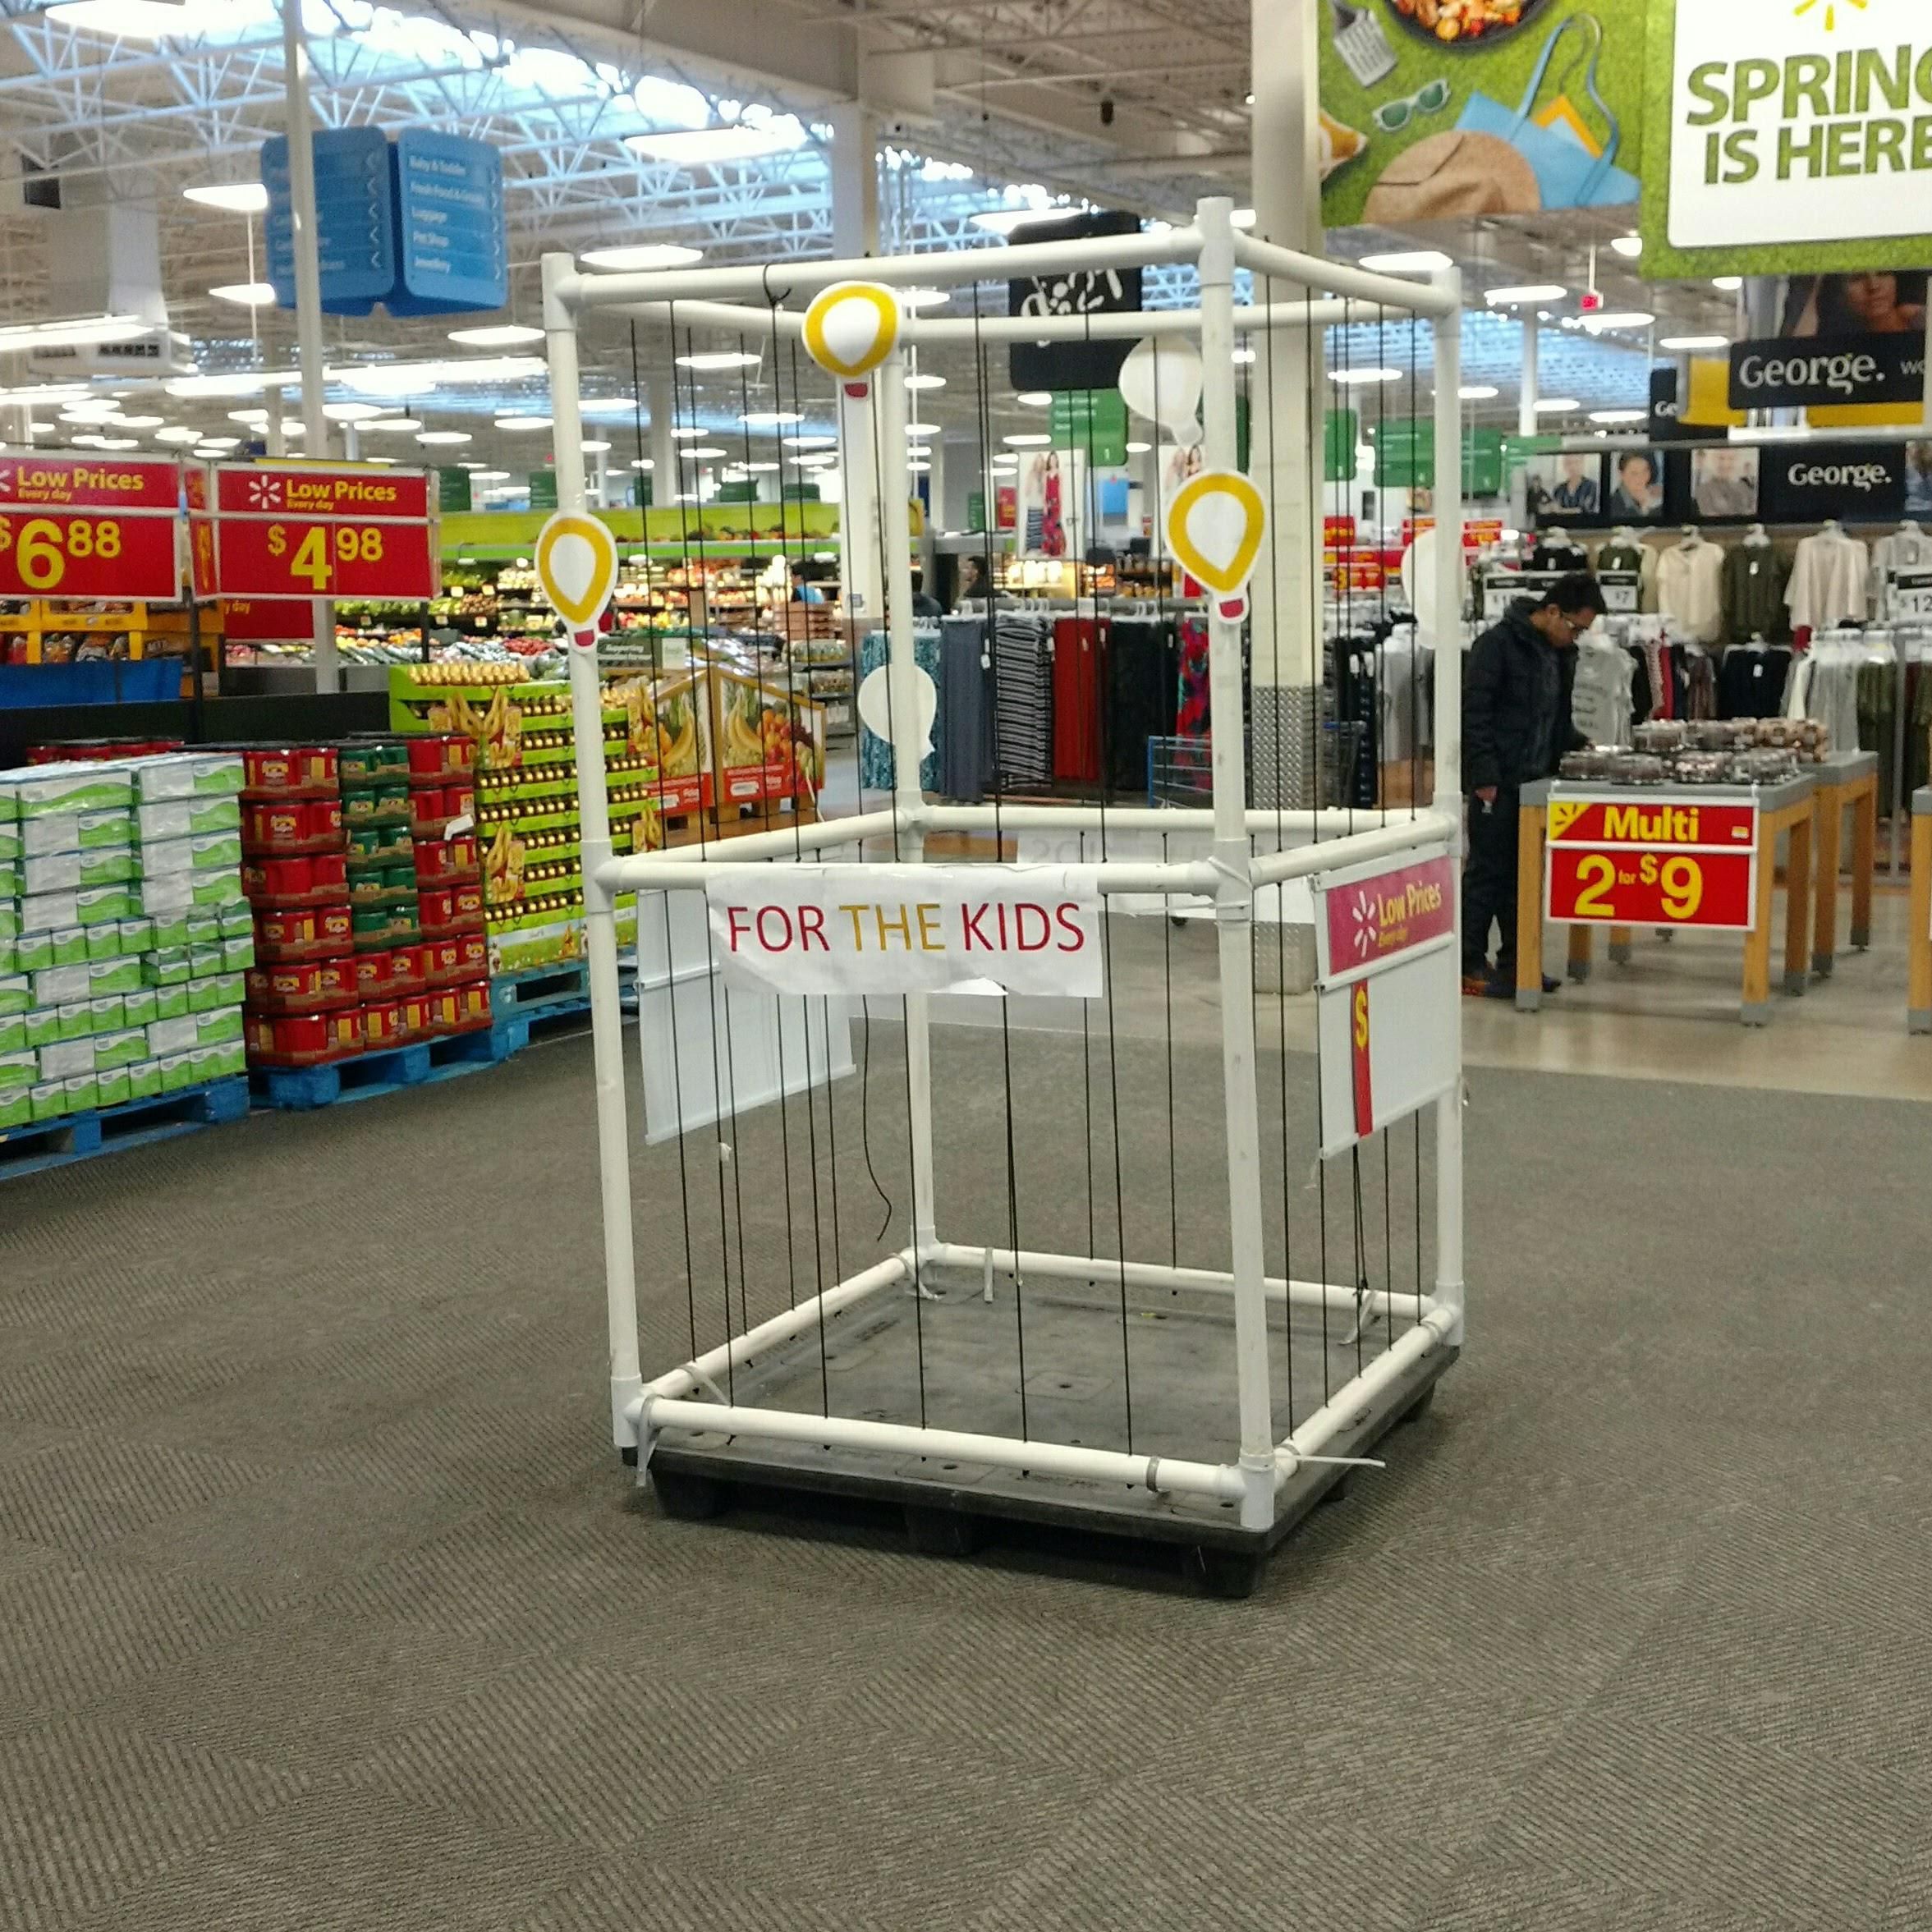 Glad to see my local Walmart finally has a place to drop off your kids while you shop!